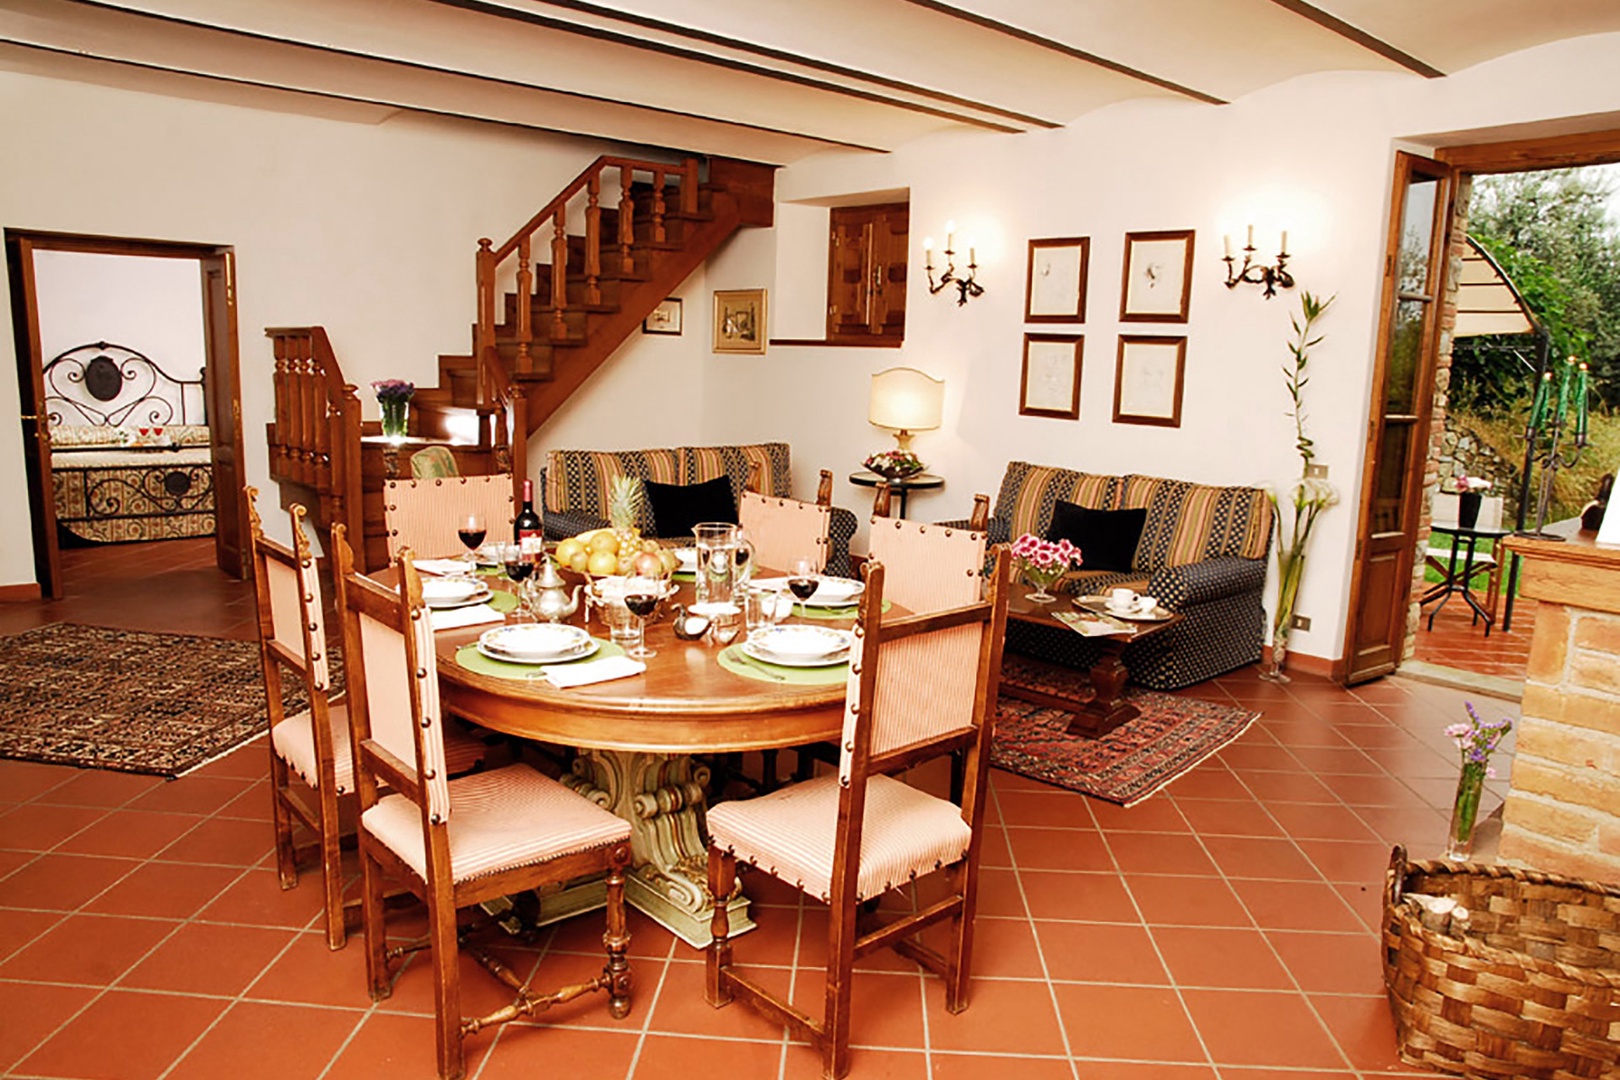 This is a two floor apartment, see the stairs off the dining area.